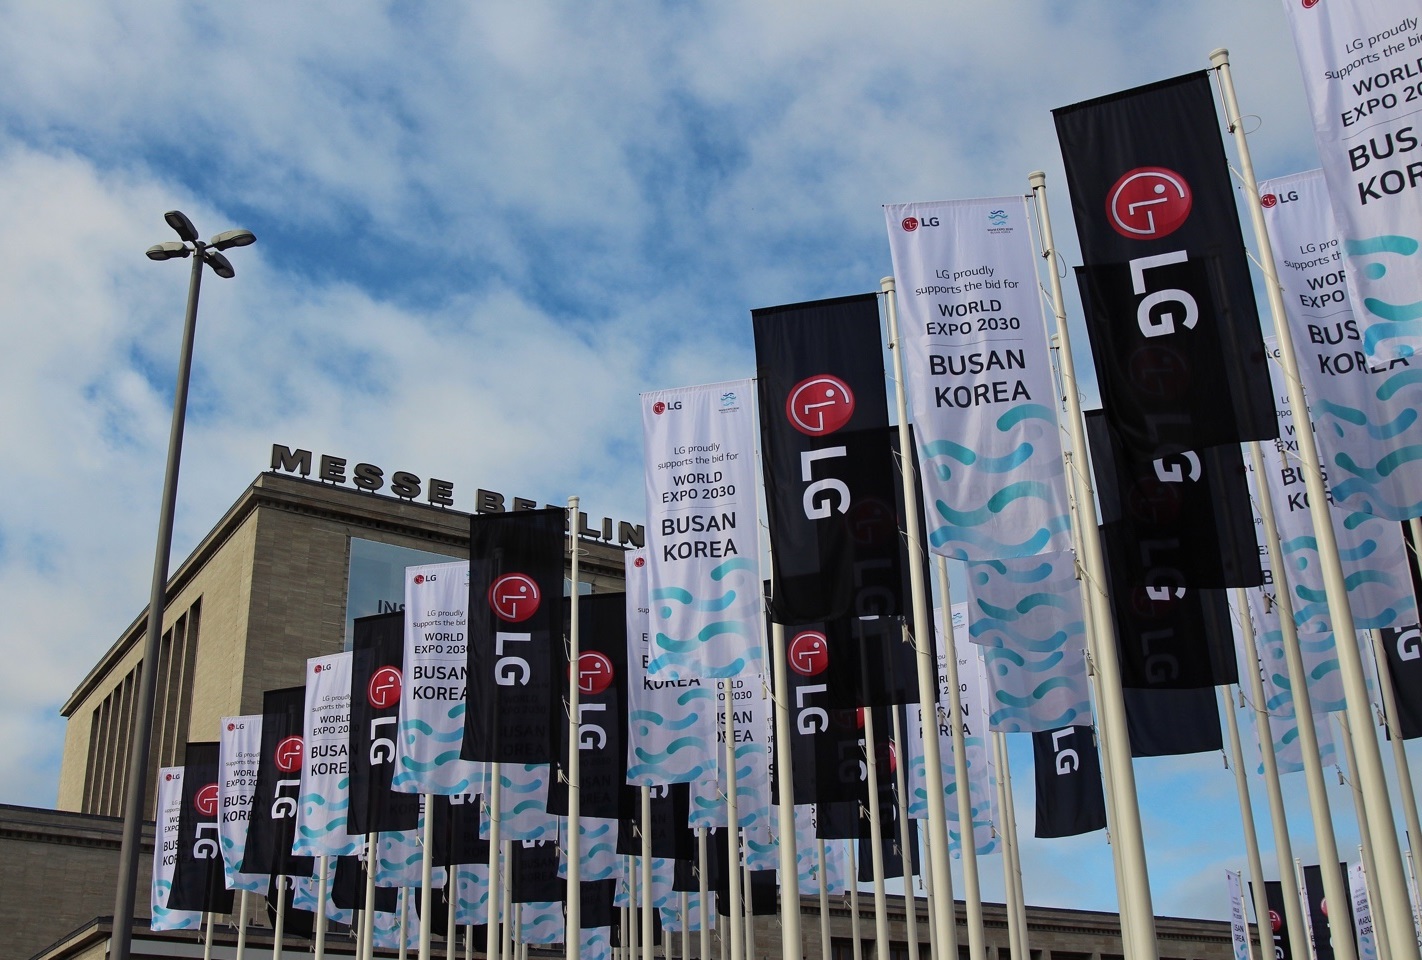 Partial view of Messe Berlin where promotional flags of LG logo and Busan's bid for World Expo 2030 were flying in front